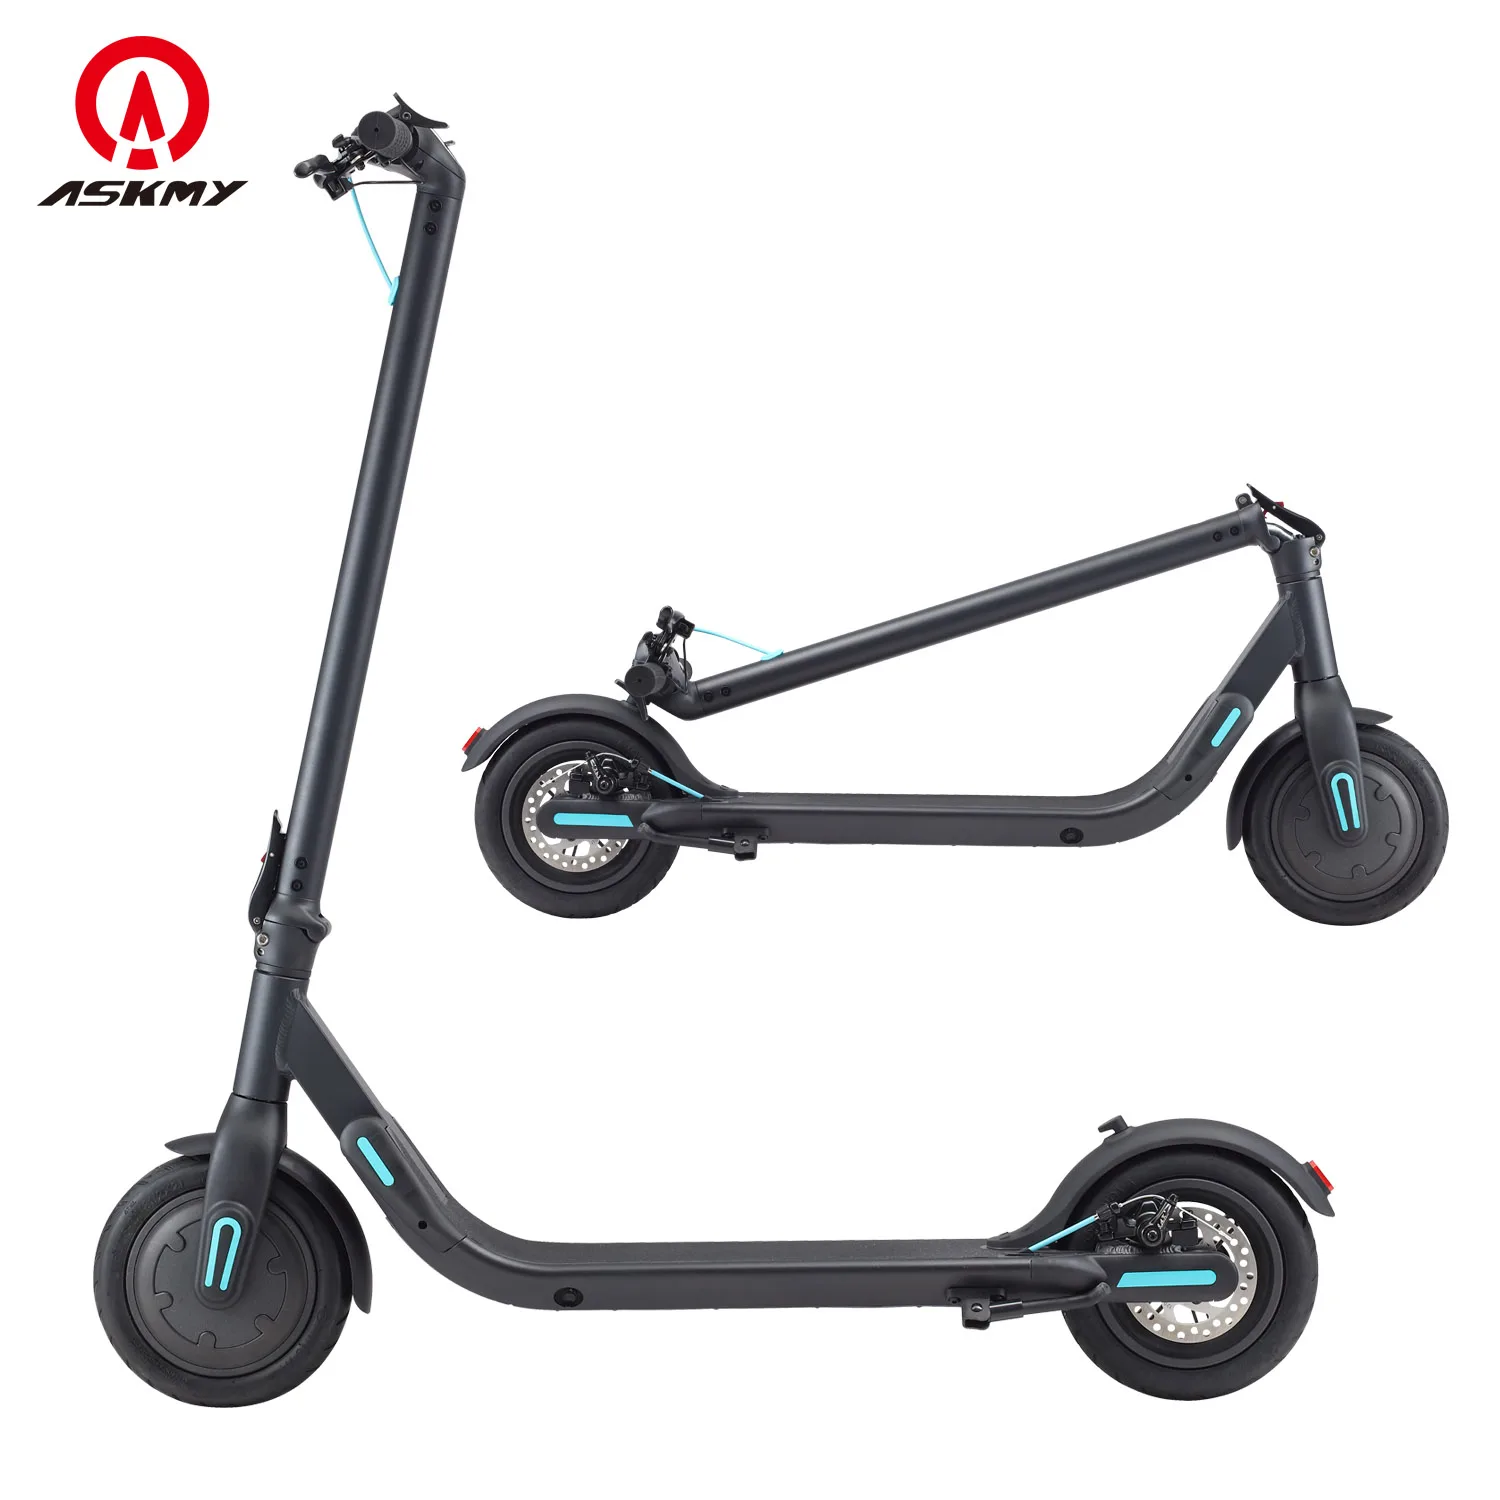 

ASKMY 2020 New Arrival EU Warehouse BIG SALE Electric Scooter Similar To Xiao mi Scooter M365 Off-Road High Speed Electric Scoot